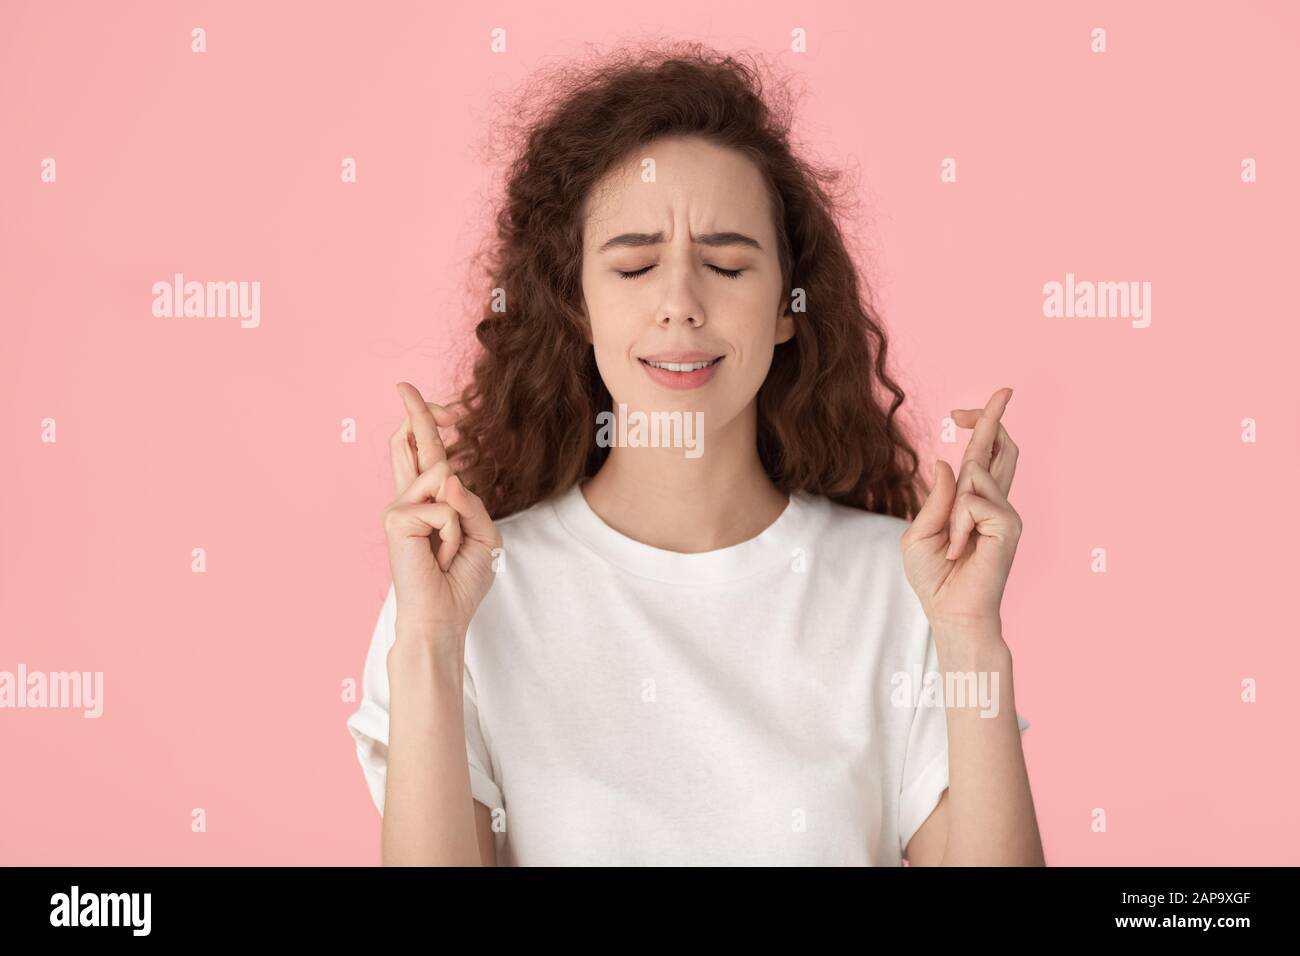 Superstitious girl crossing fingers, hoping for good luck. Stock Photo